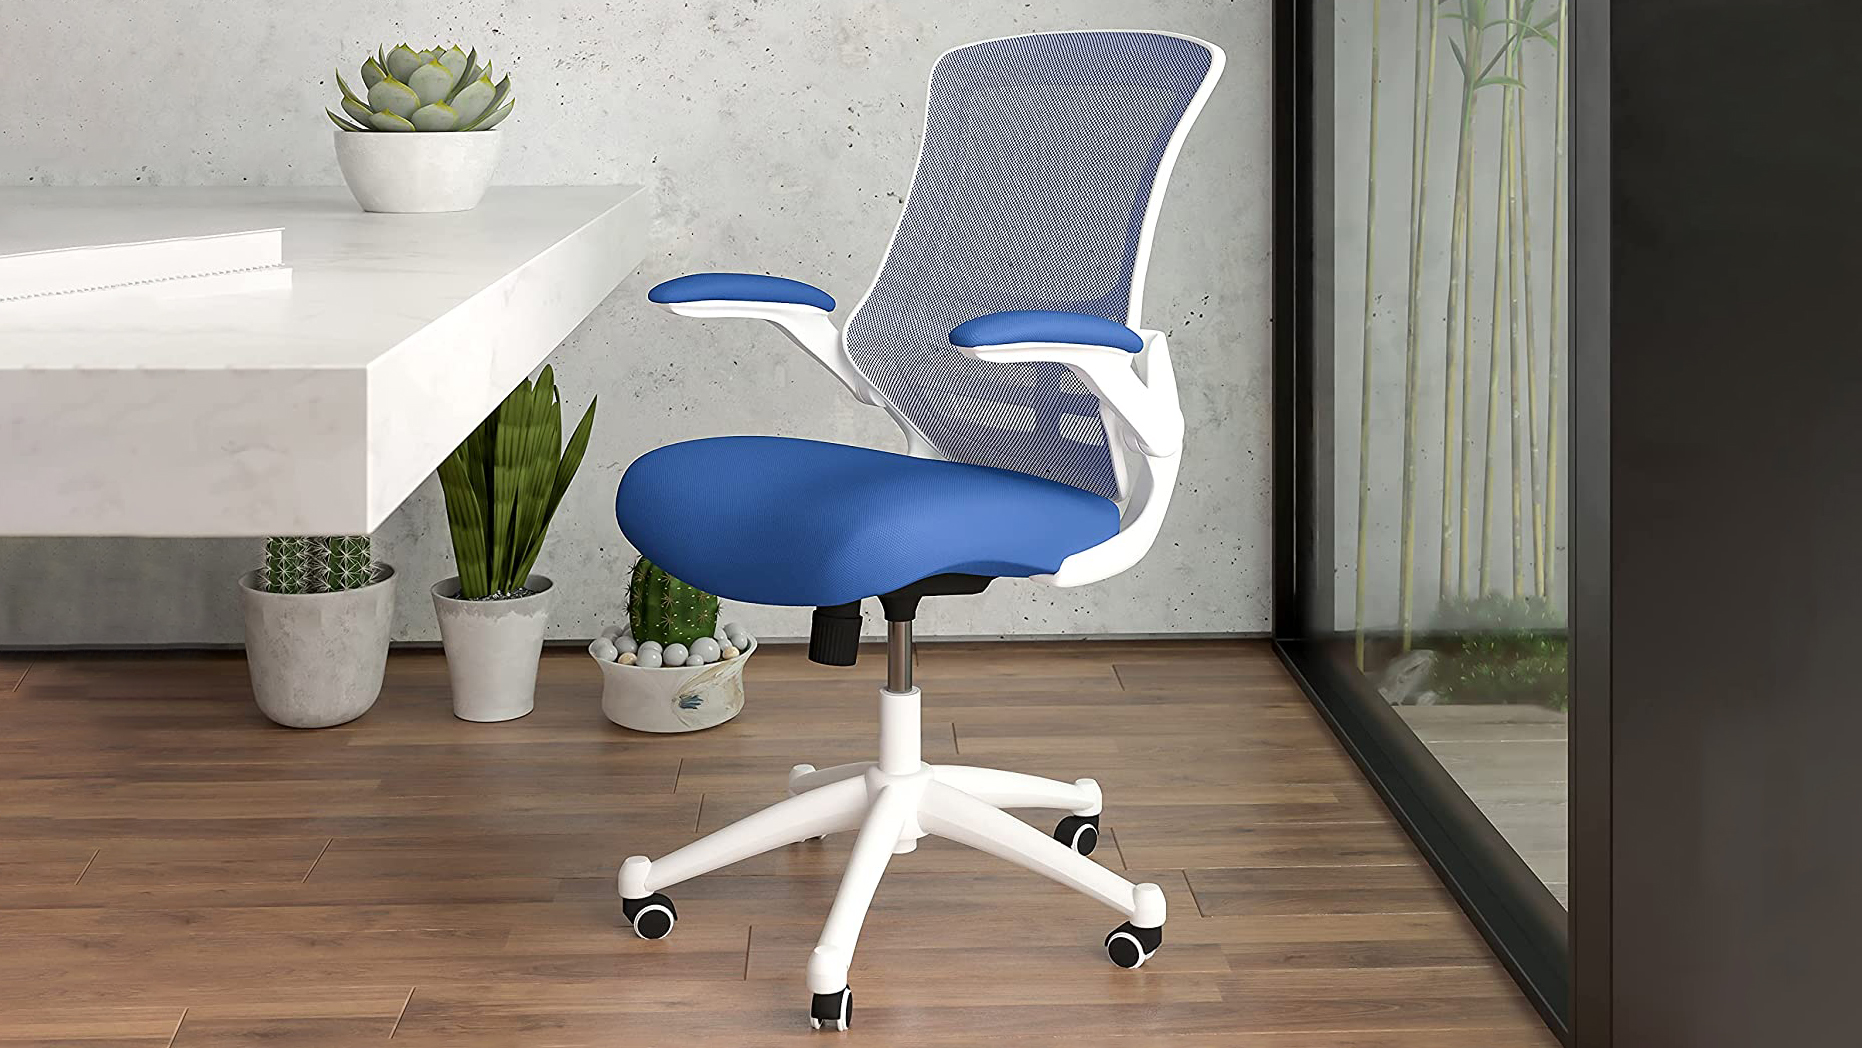 Flash Furniture Mid-Back Office Chair in office